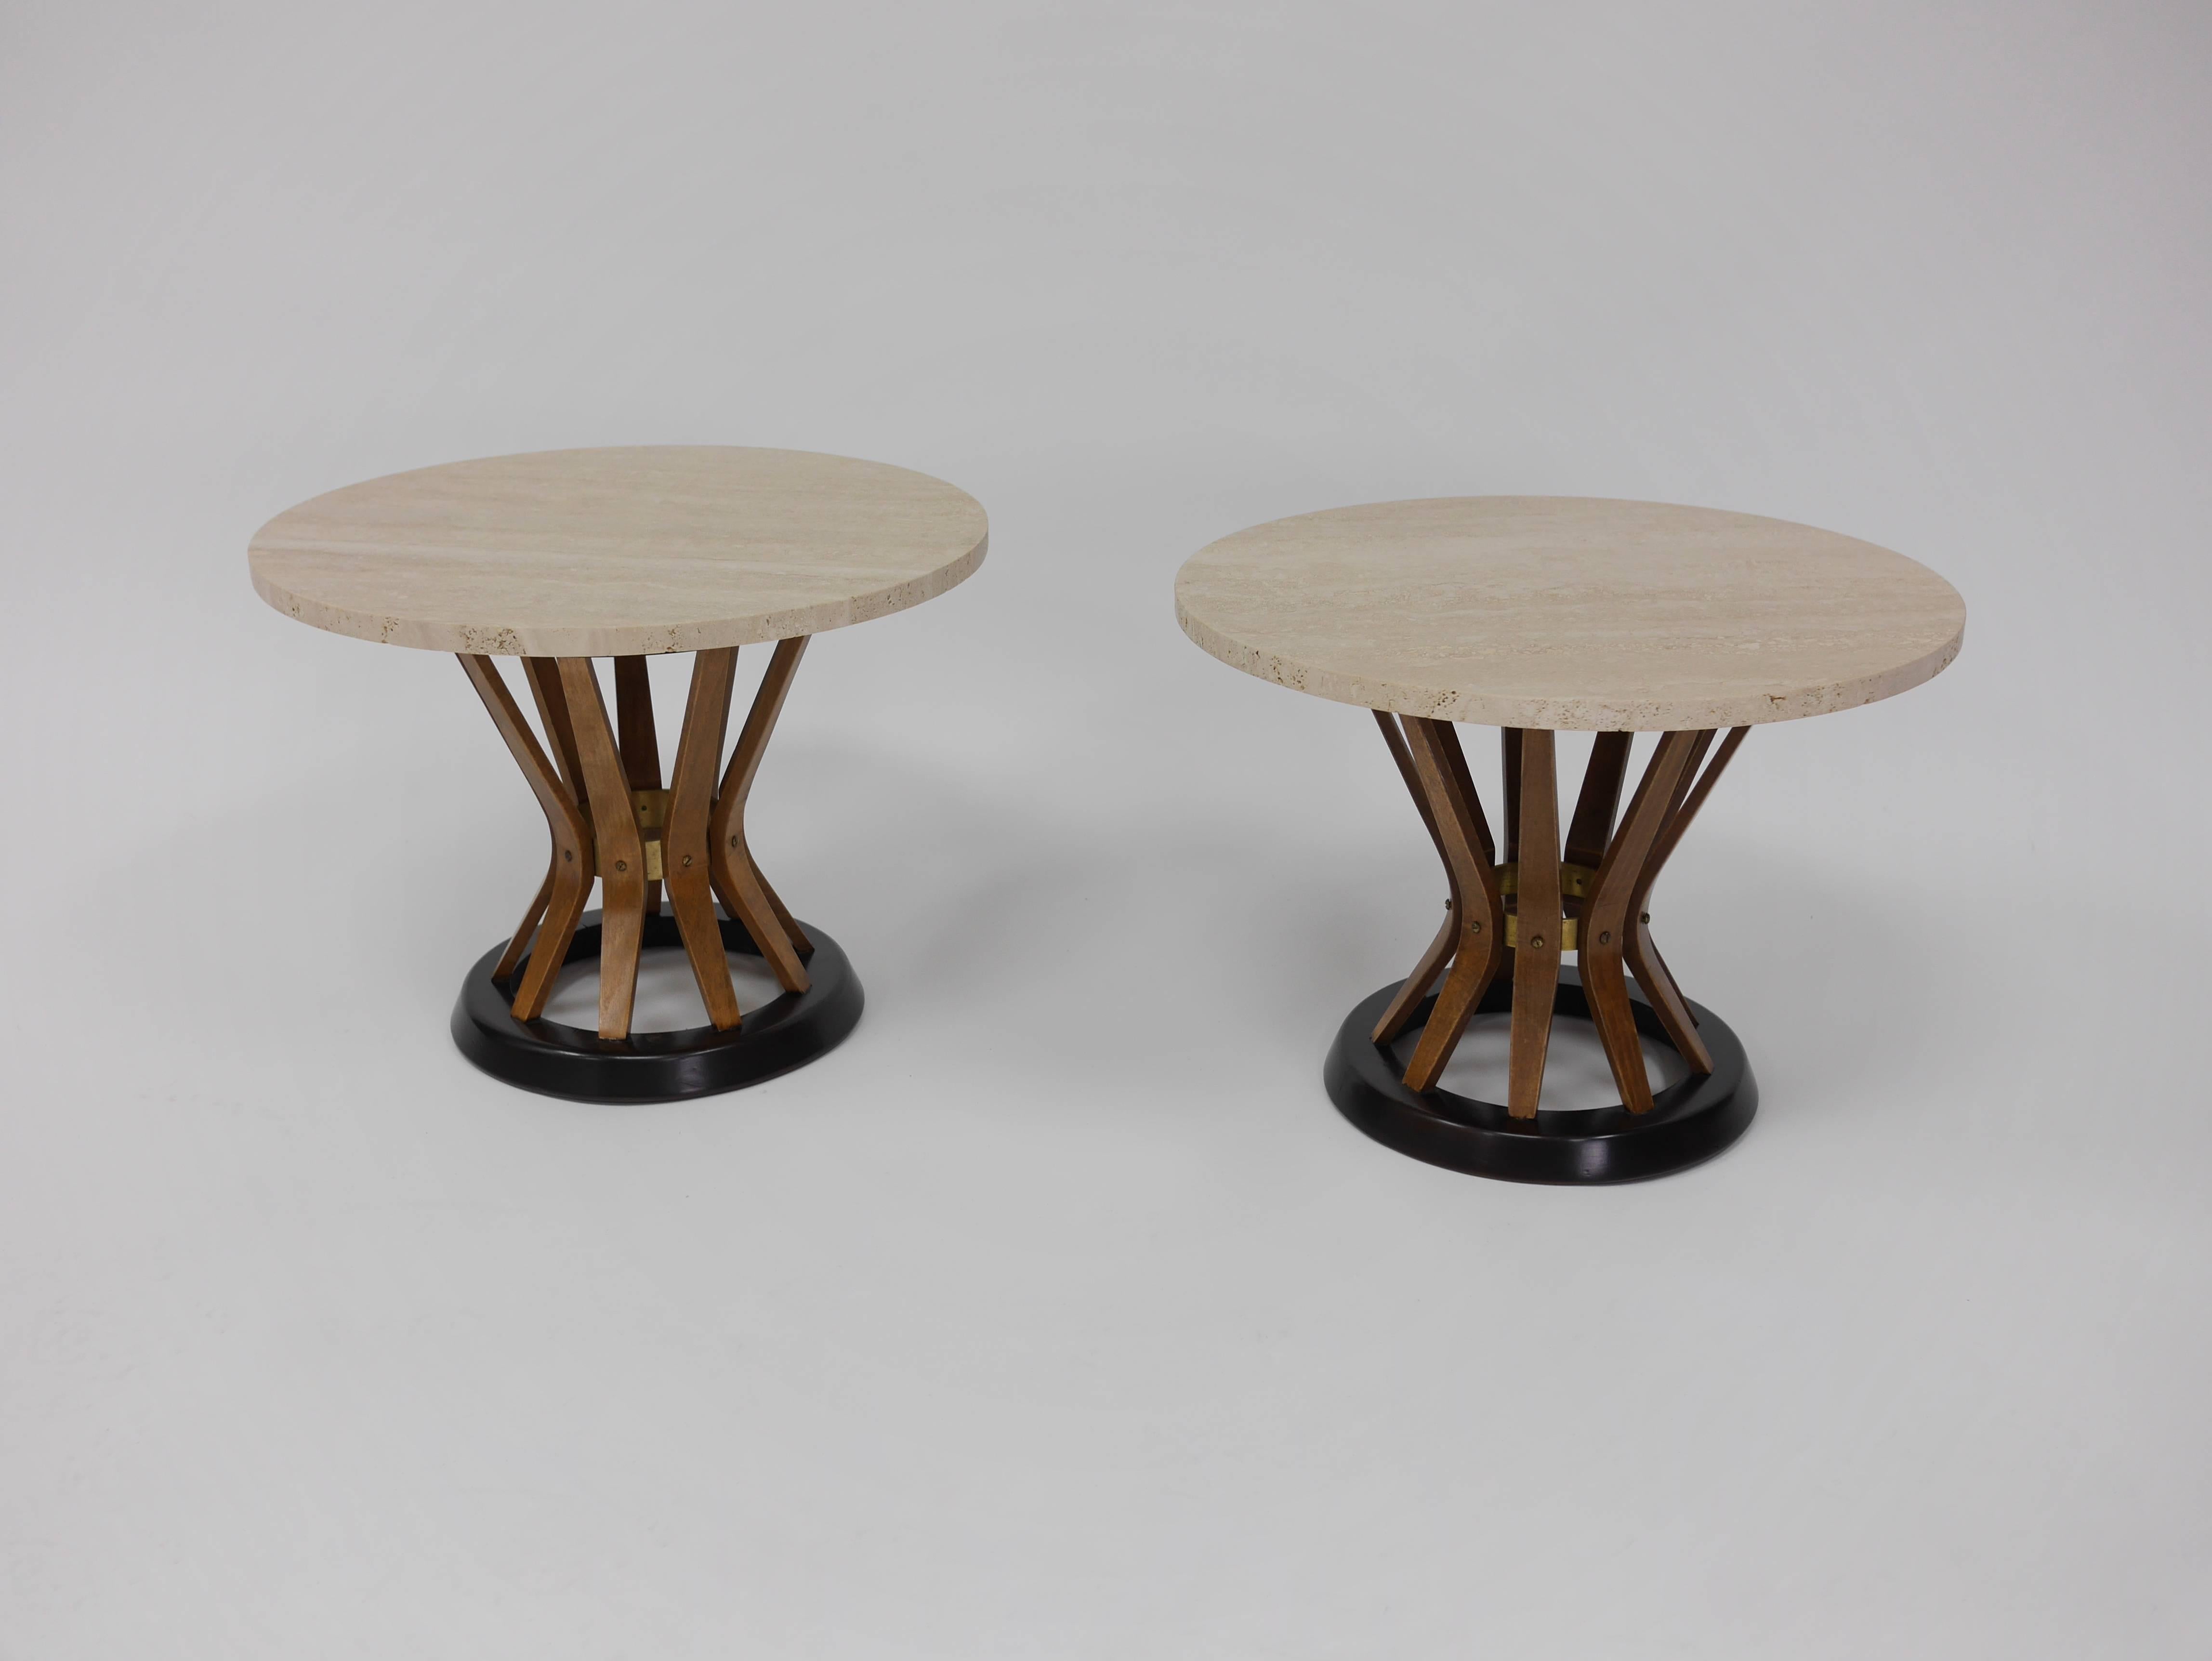 Pair of Sheaf of Wheat Side Tables by Edward Wormley for Dunbar In Excellent Condition For Sale In Hadley, MA